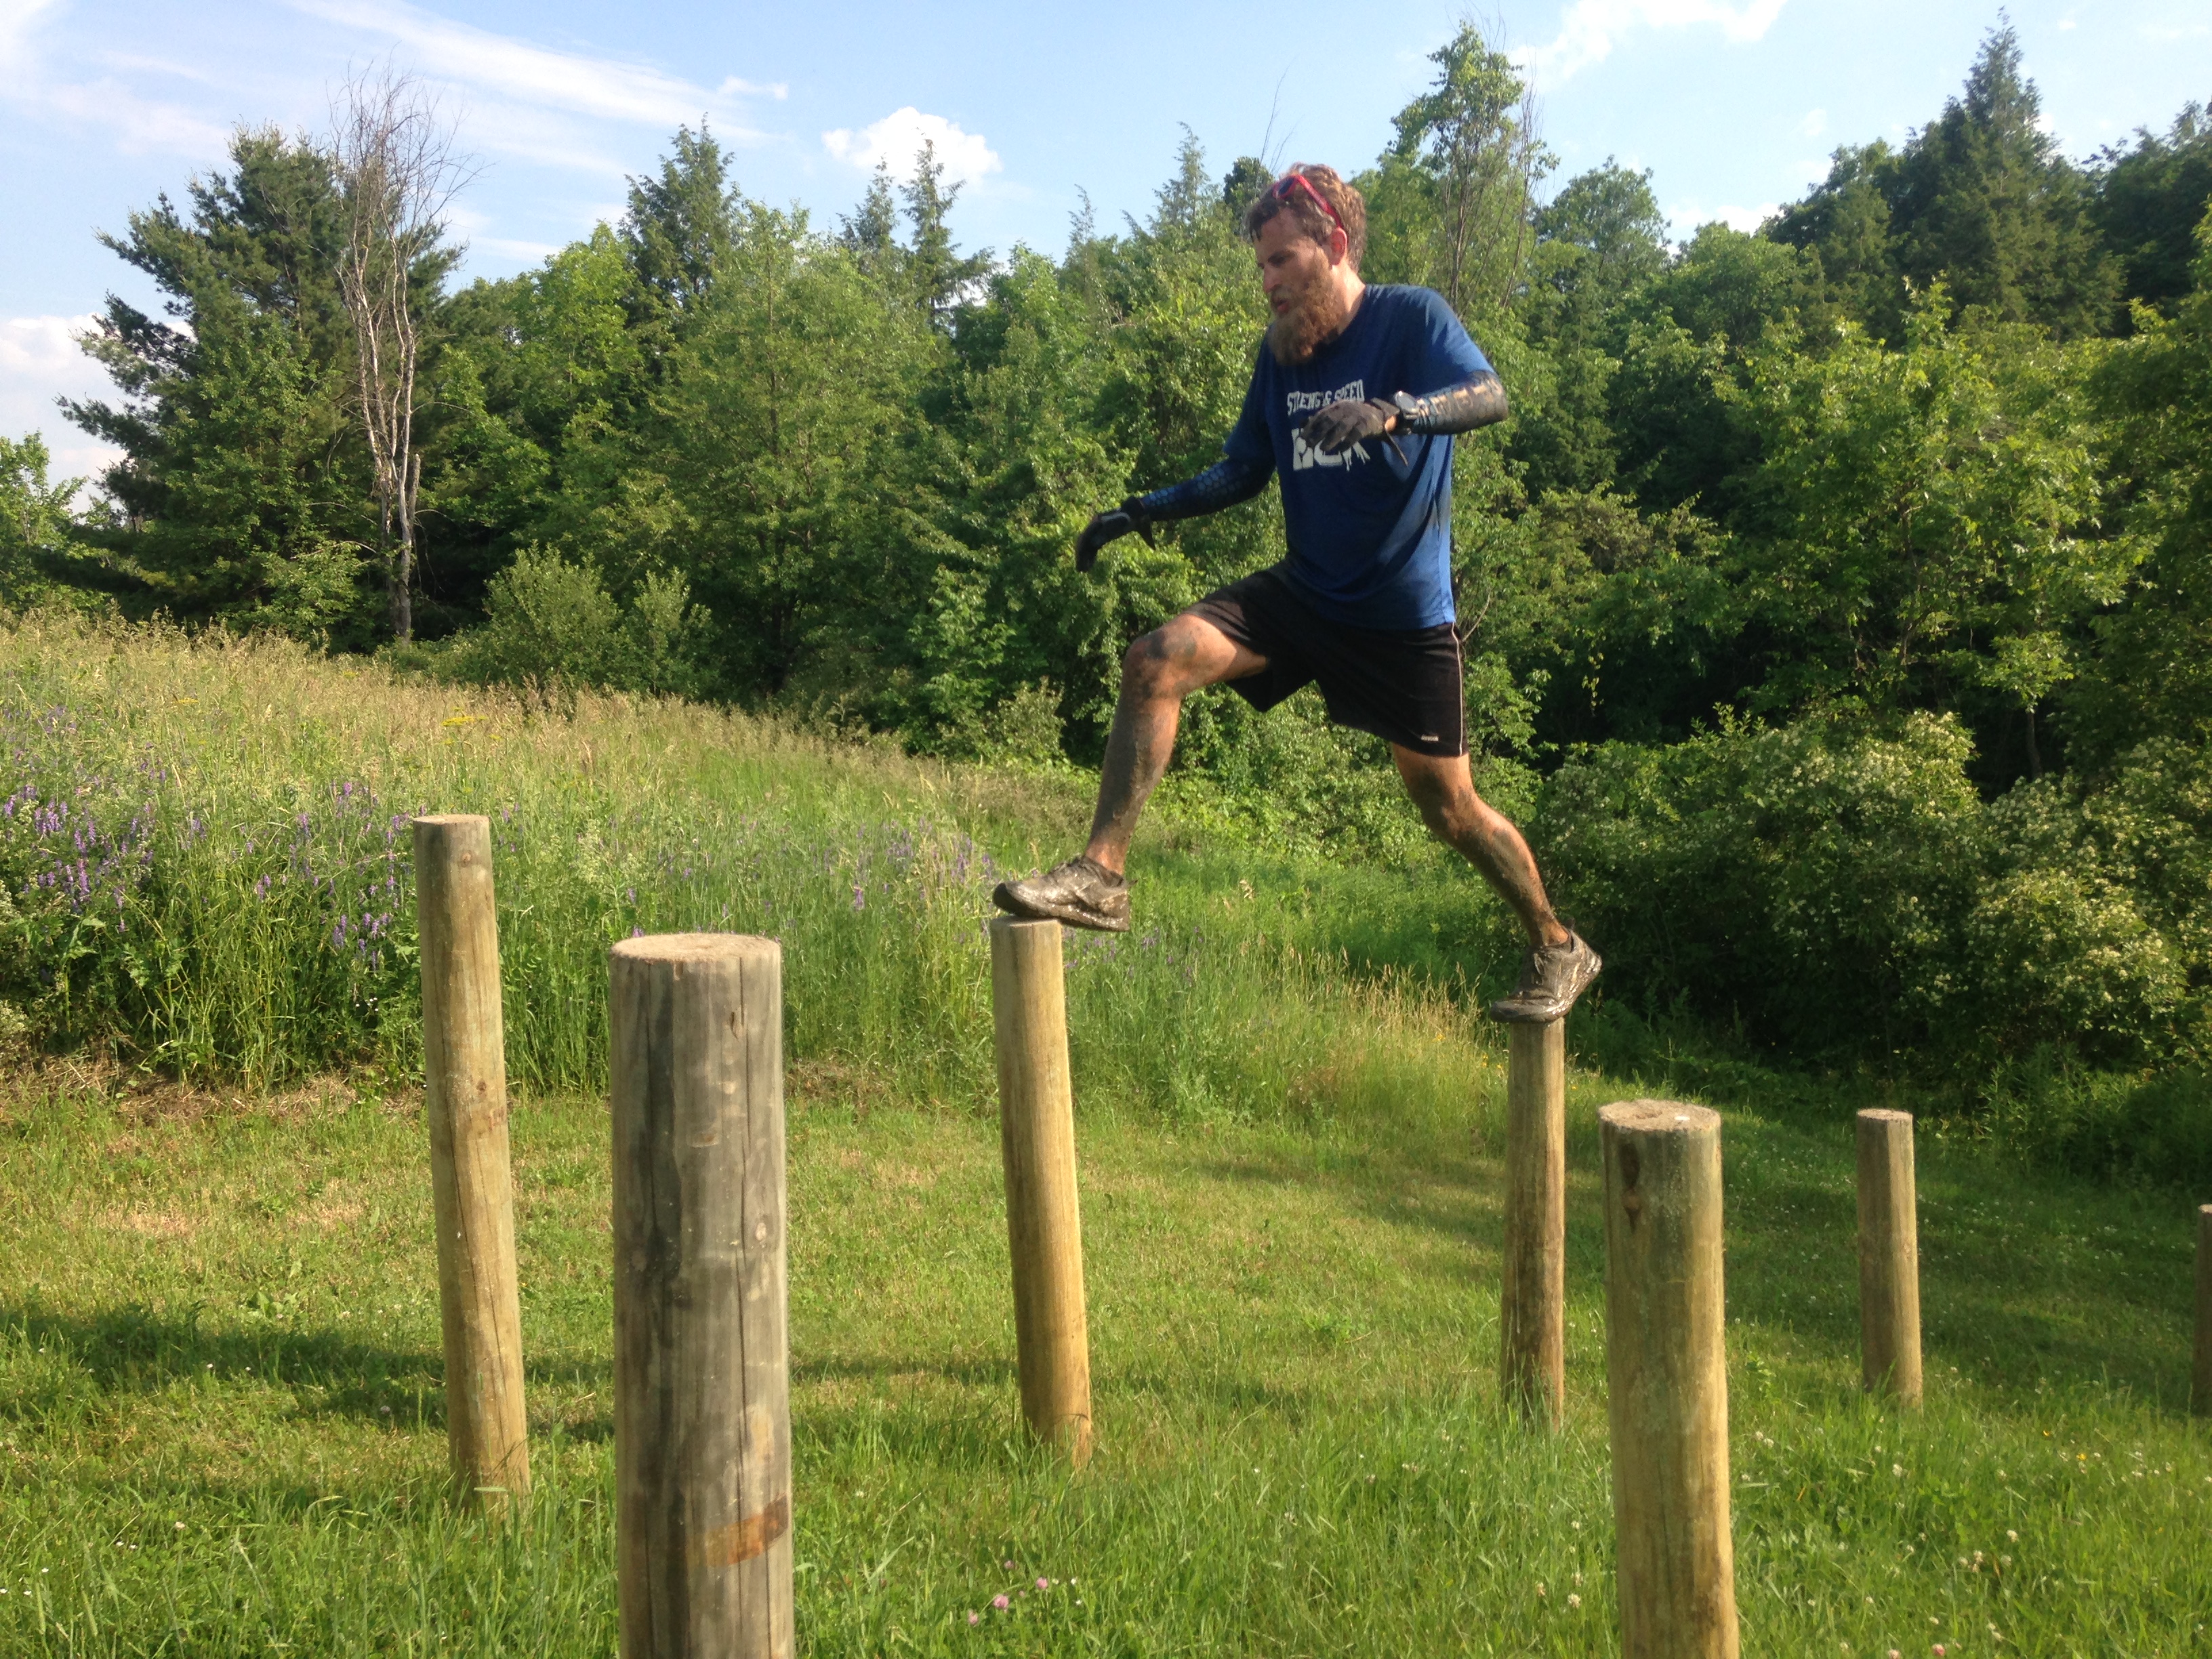 Jordan Smith was a crucial pacer during the event. He ran a total of 60 miles over four days of OCR.